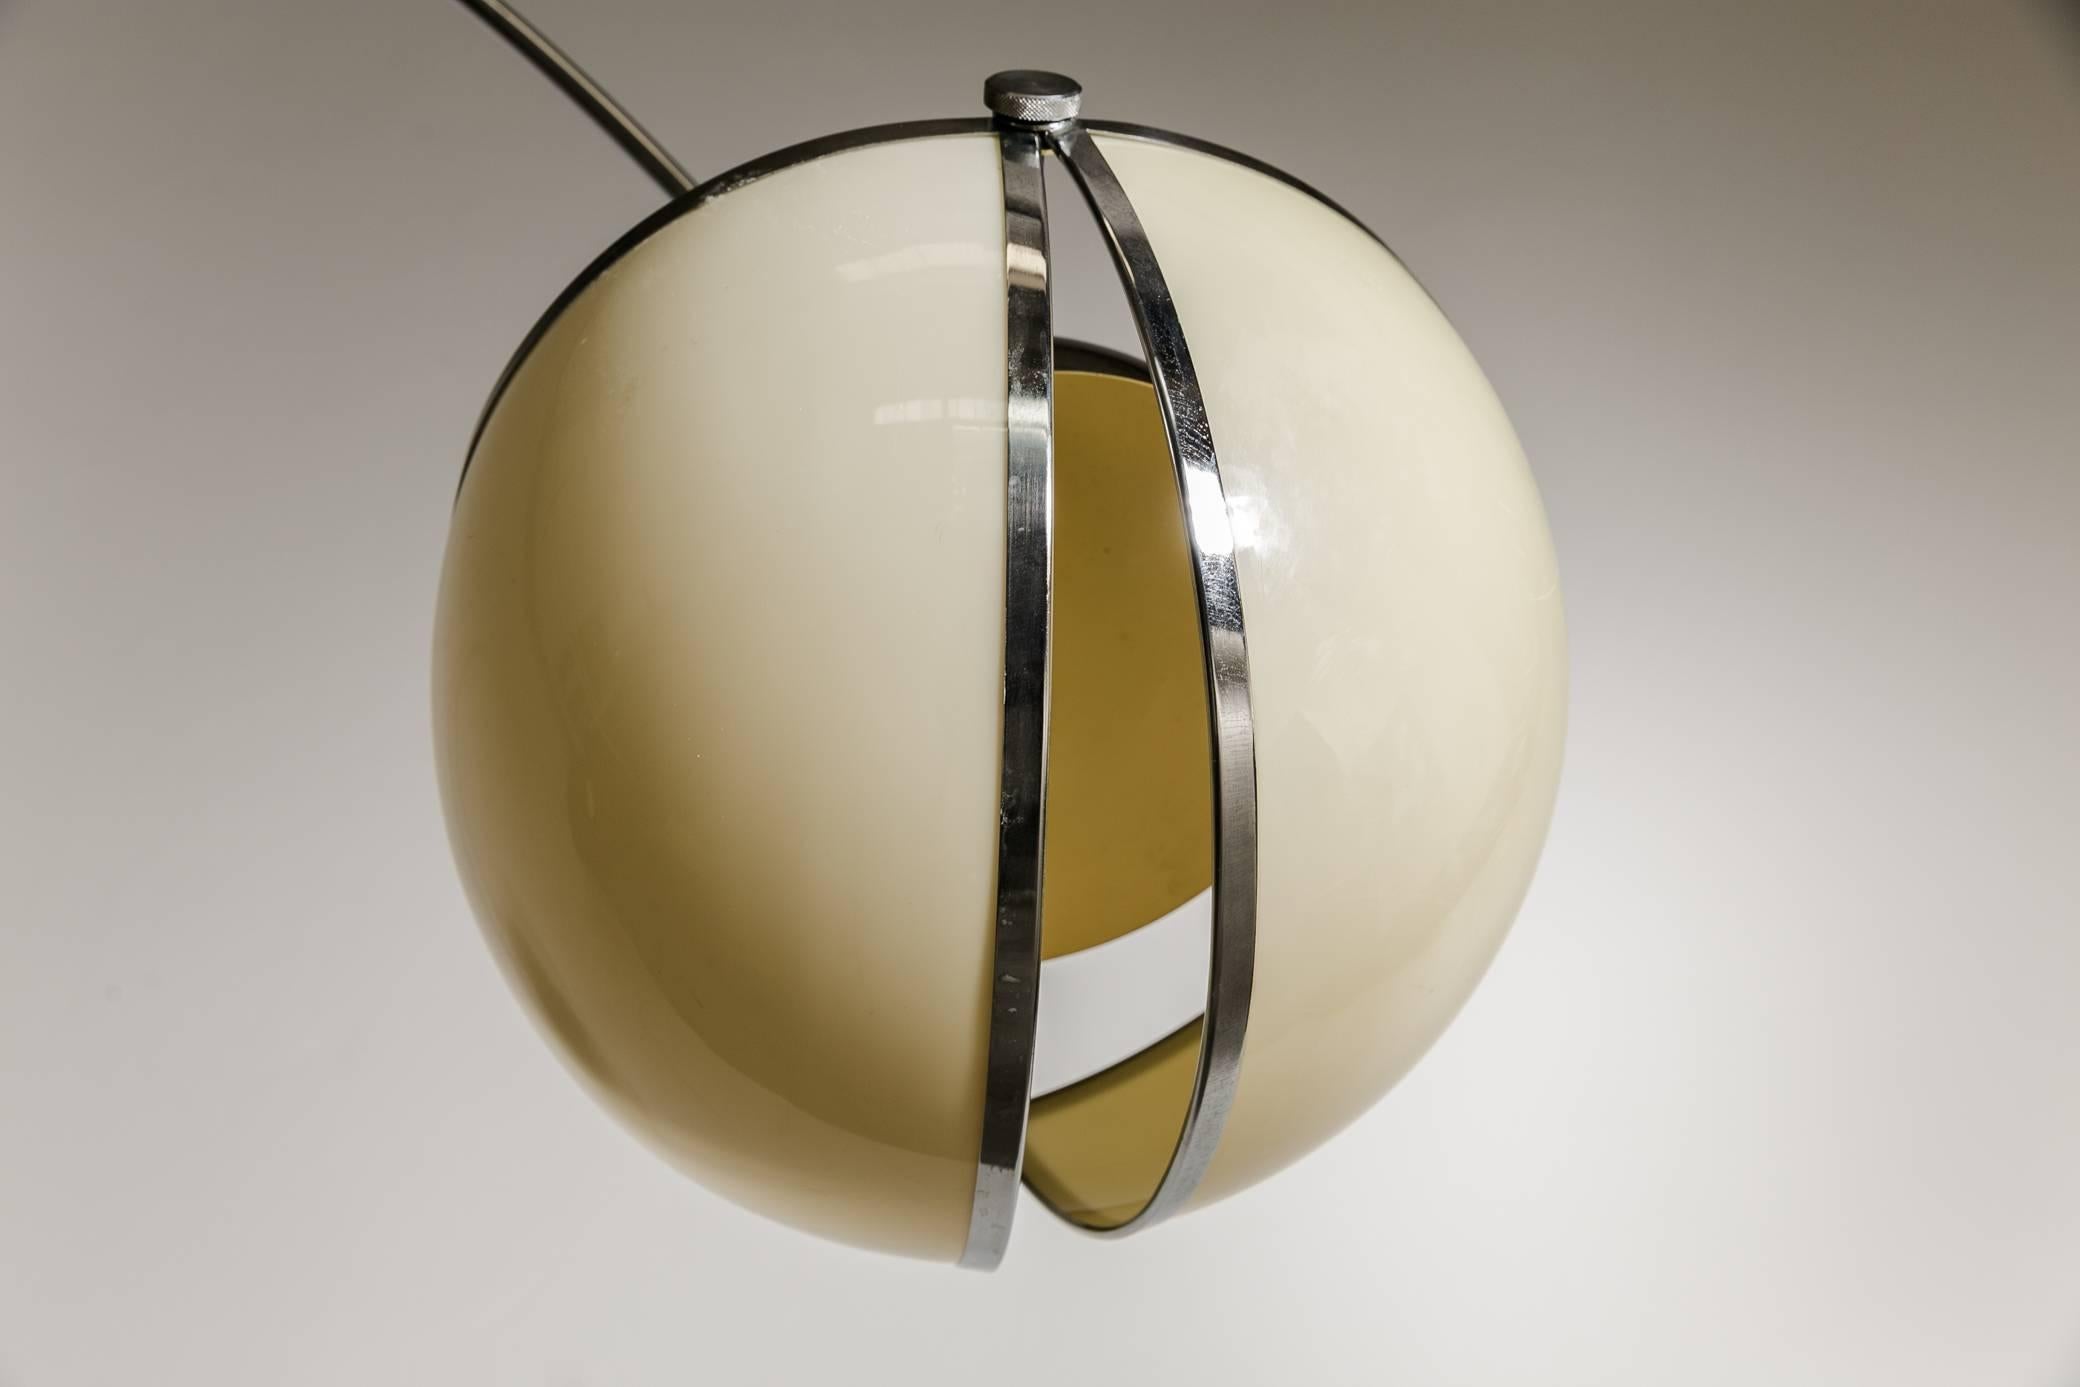 20th Century Oolok/Molok Arco Lamp In the style of  Superstudio, 1968, Italy